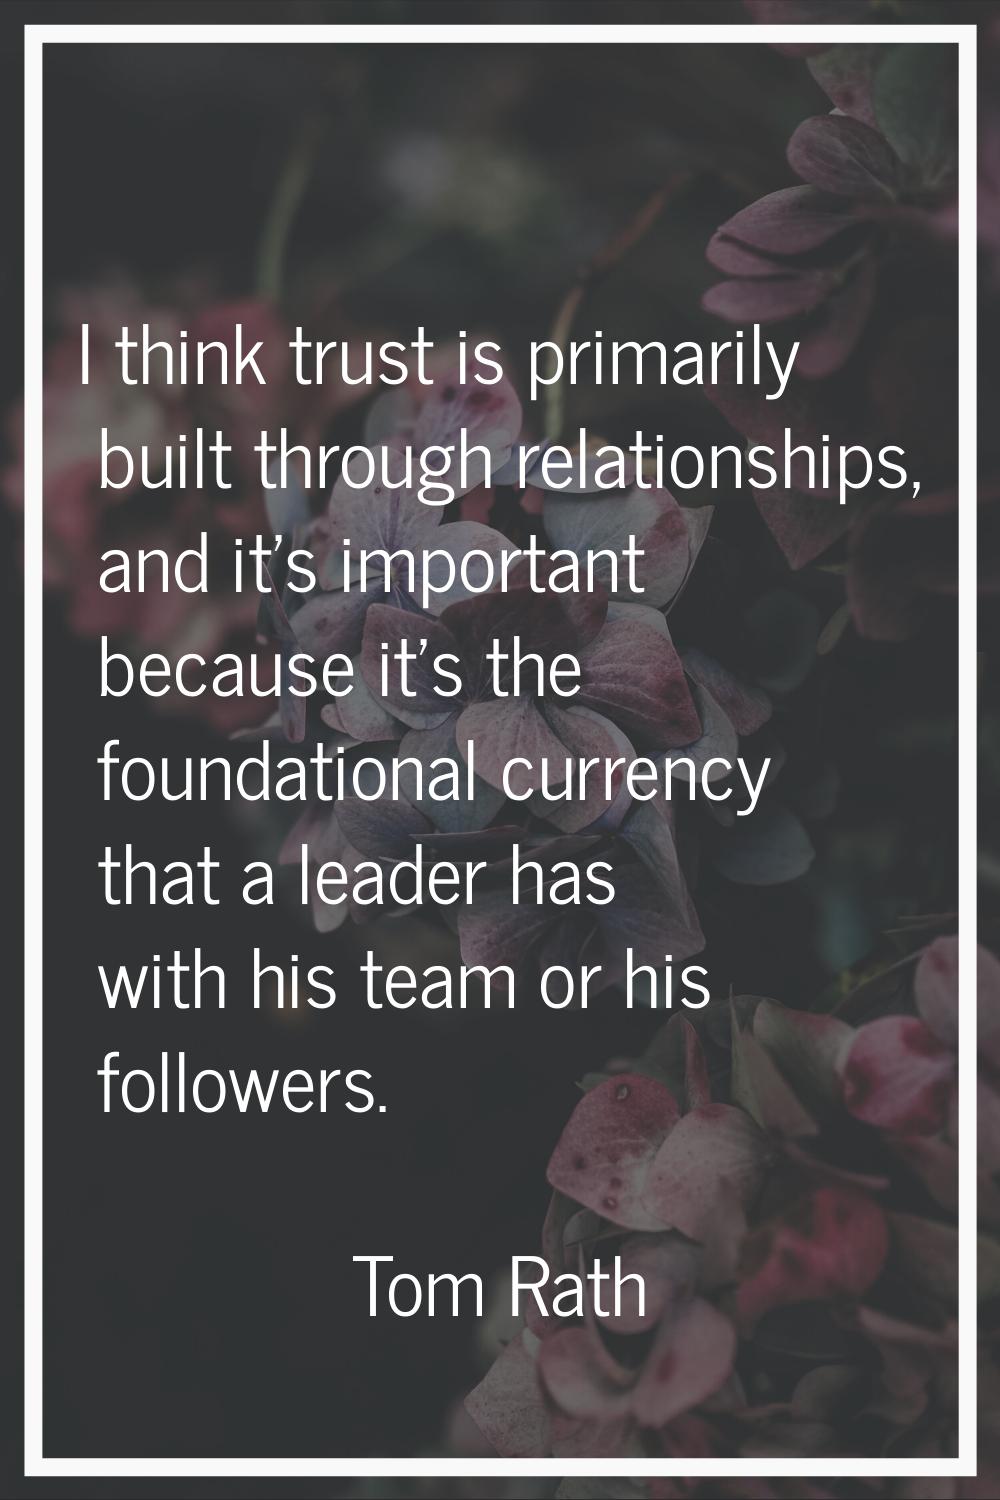 I think trust is primarily built through relationships, and it's important because it's the foundat